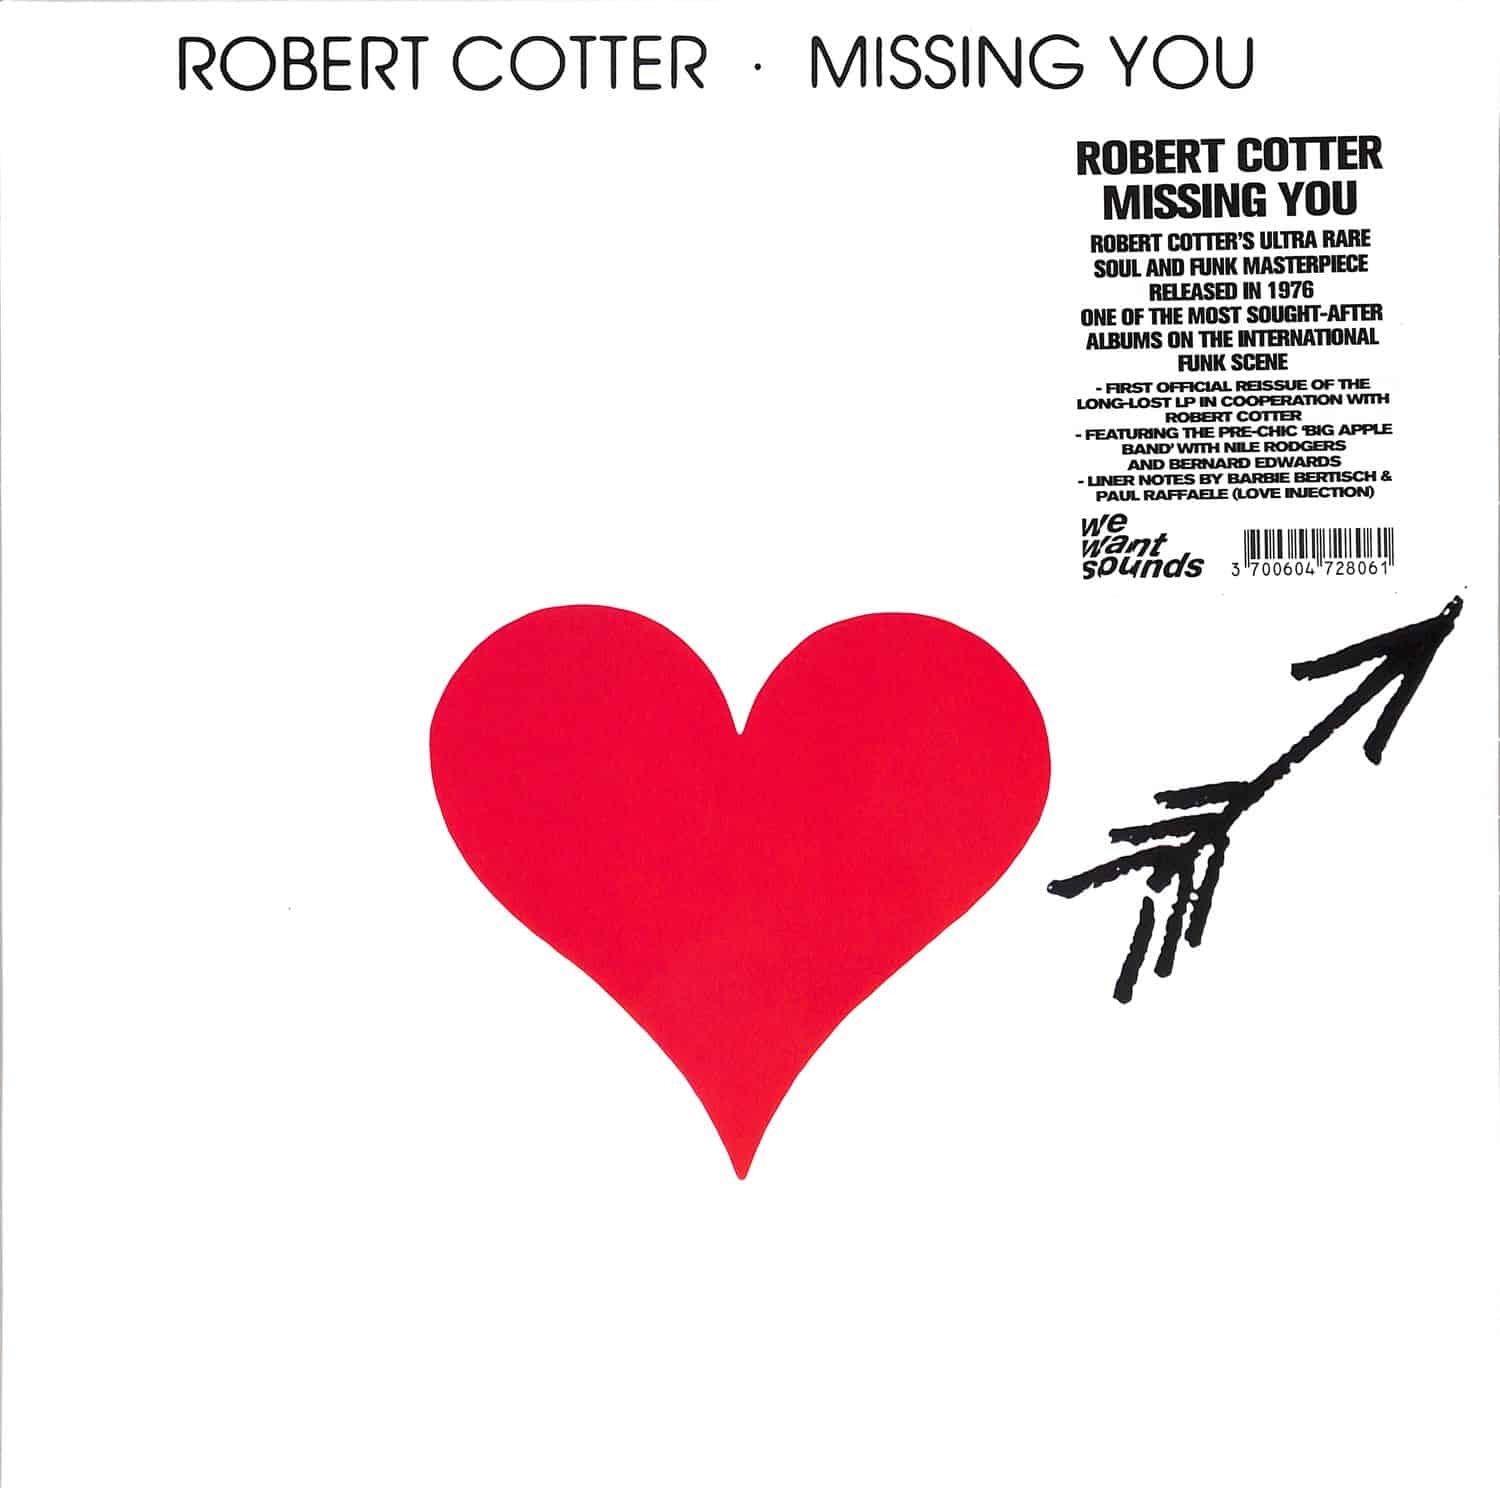 Robert Cotter - MISSING YOU 